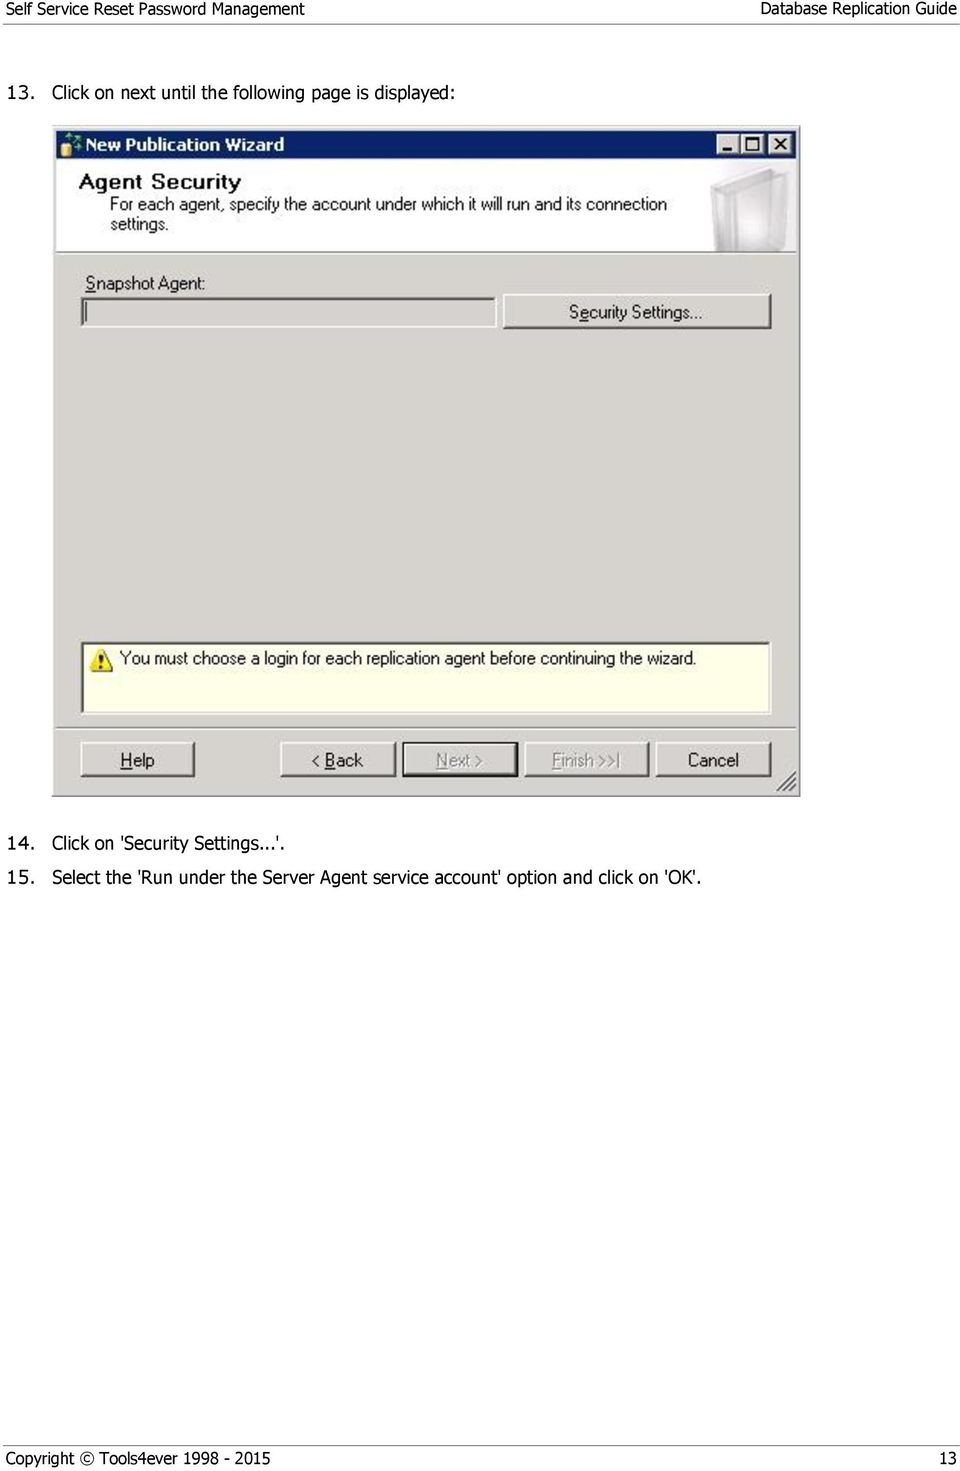 Select the 'Run under the Server Agent service